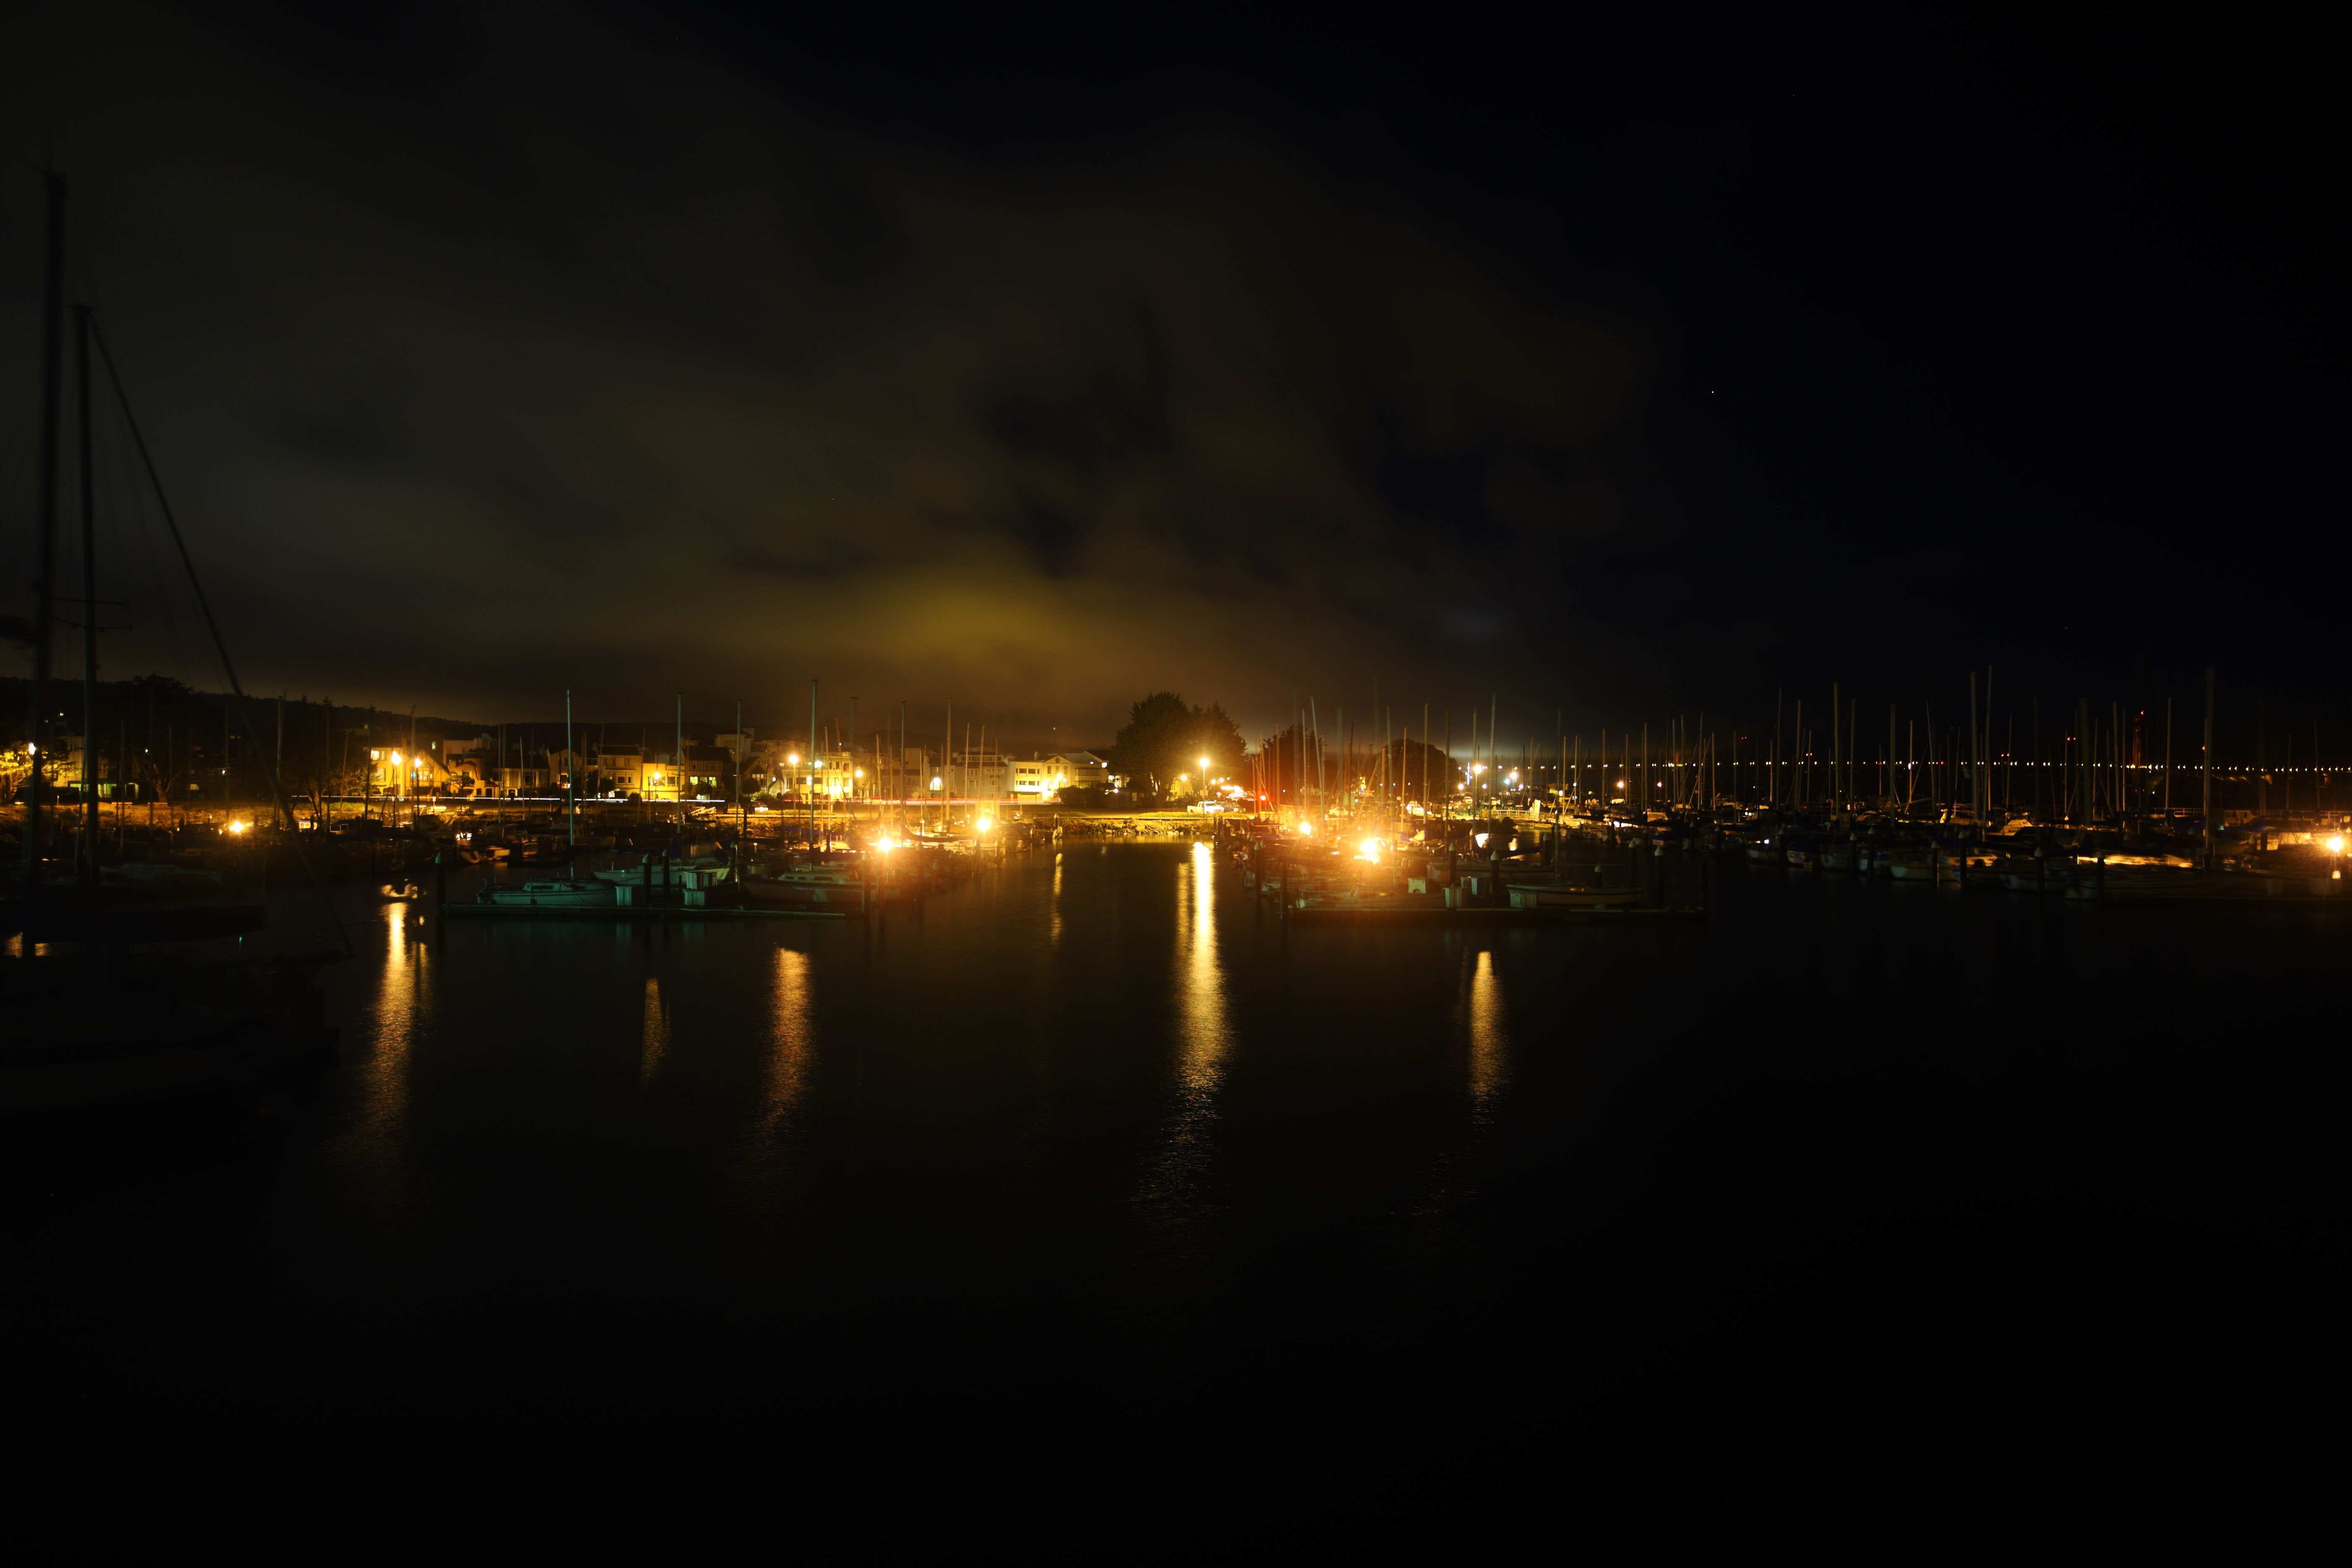 photo,material,free,landscape,picture,stock photo,Creative Commons,A night harbor, Illumination, yacht, lighter, night fog